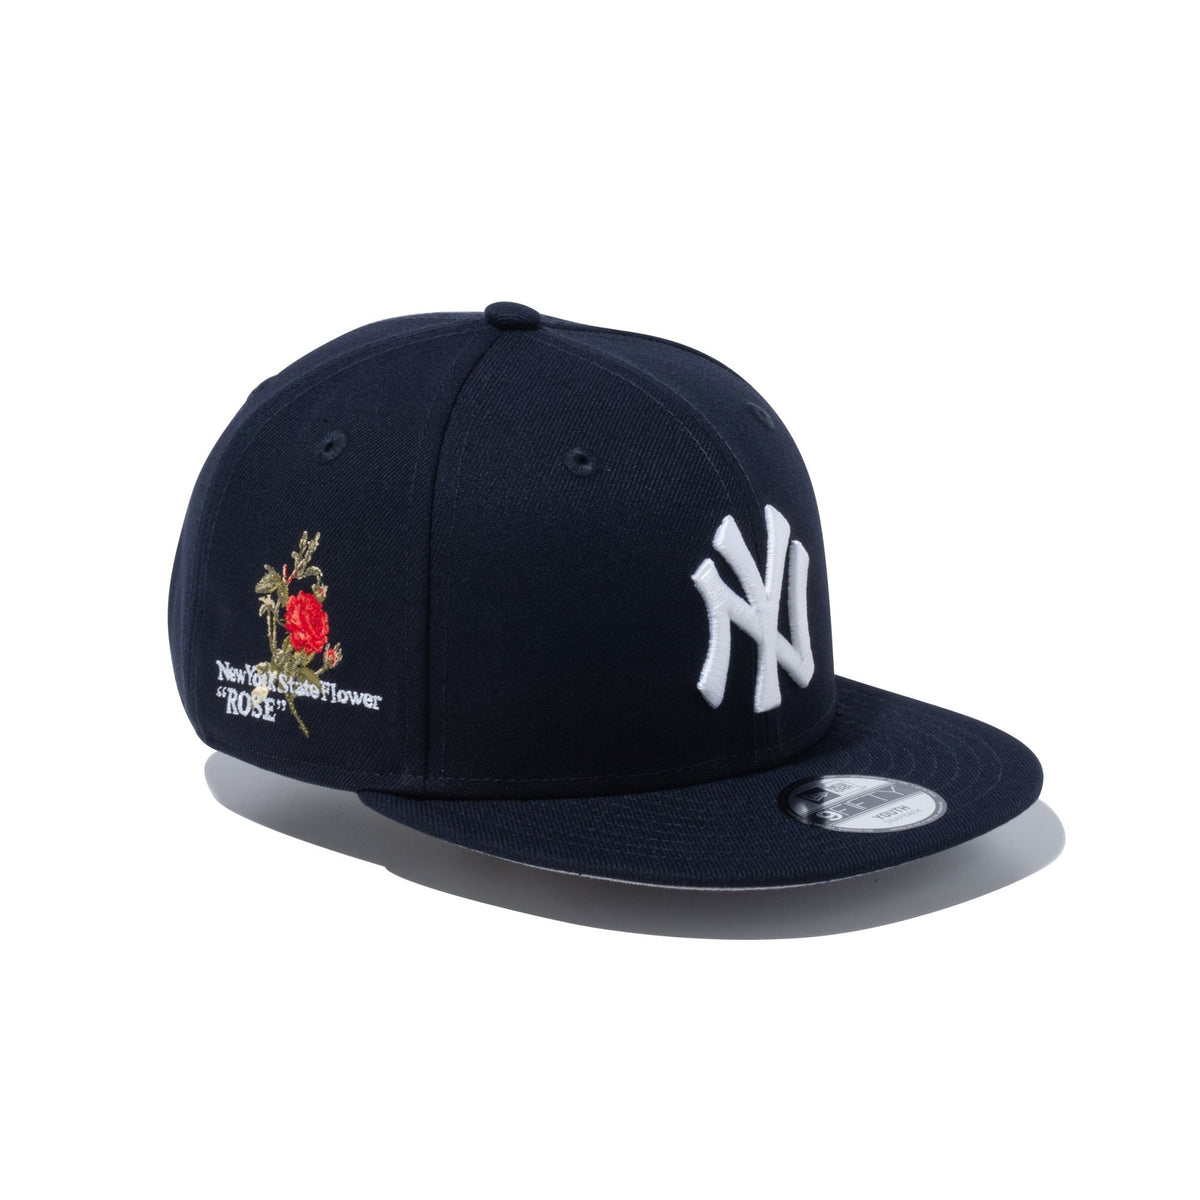 Youth 9FIFTY MLB State Flowers ニューヨーク・ヤンキース 